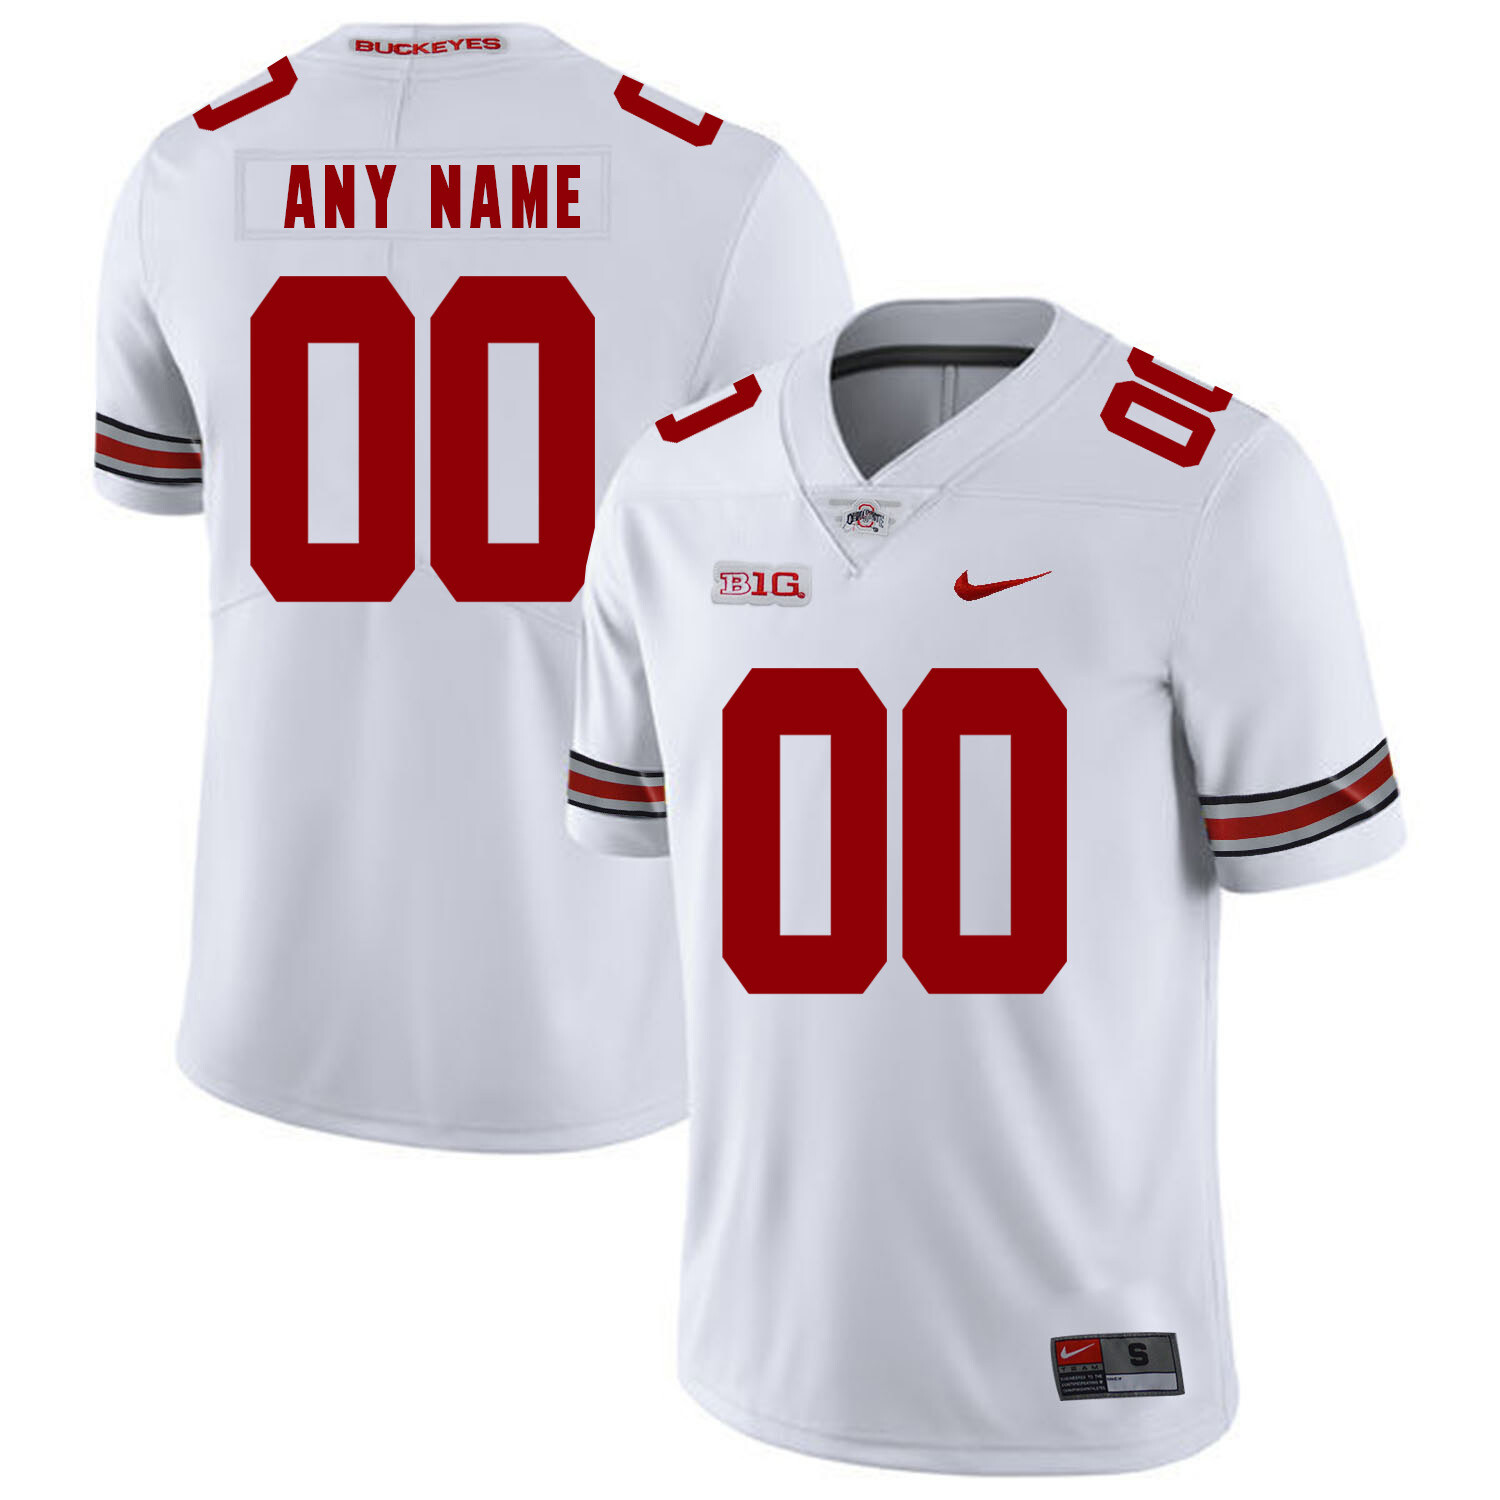 Ohio State Buckeyes Custom Name and Number Football Jersey Big Patch White